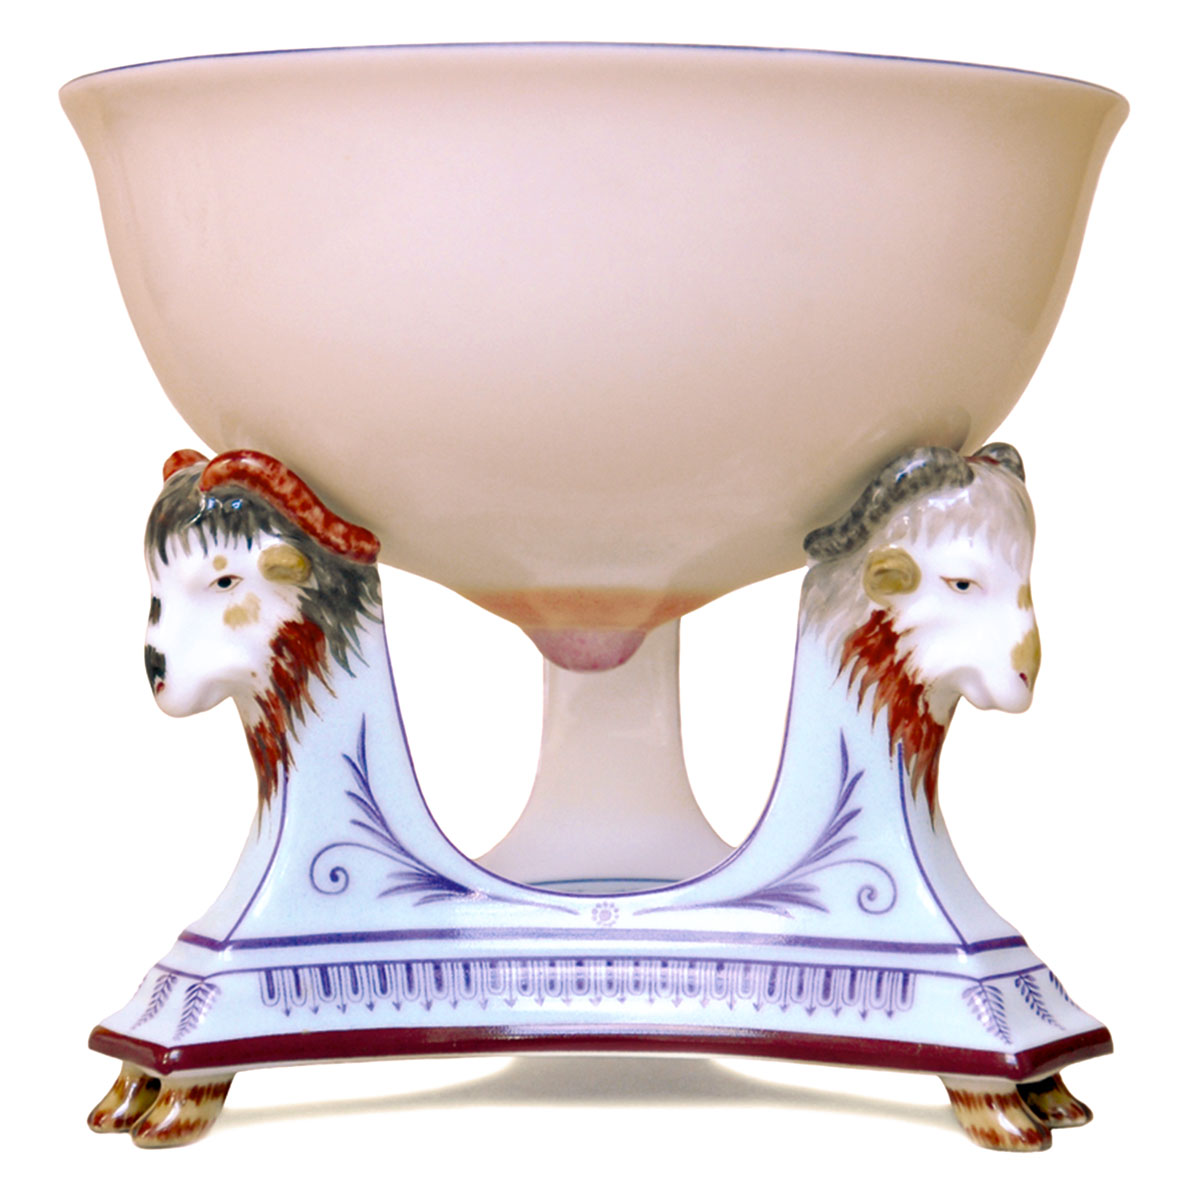 A photograph of a replica of the Sèvres “breast cup,” which was designed by Jean-Jacques Lagrenée for the Queen’s Dairy at Rambouillet, circa seventeen eighty-six to seventeen eighty-seven.